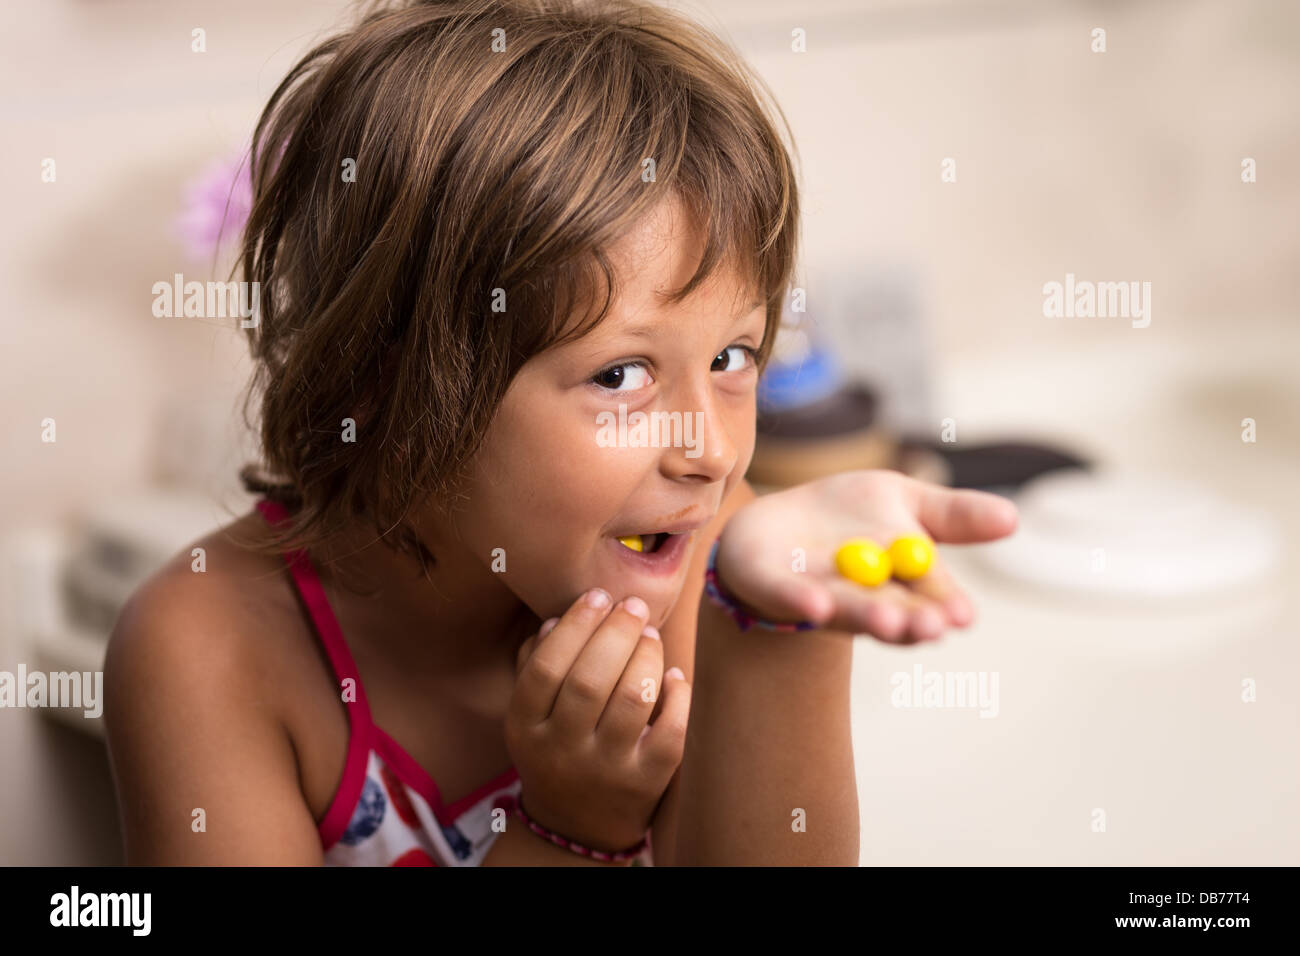 Young girl eating yellow chocolate candy Stock Photo